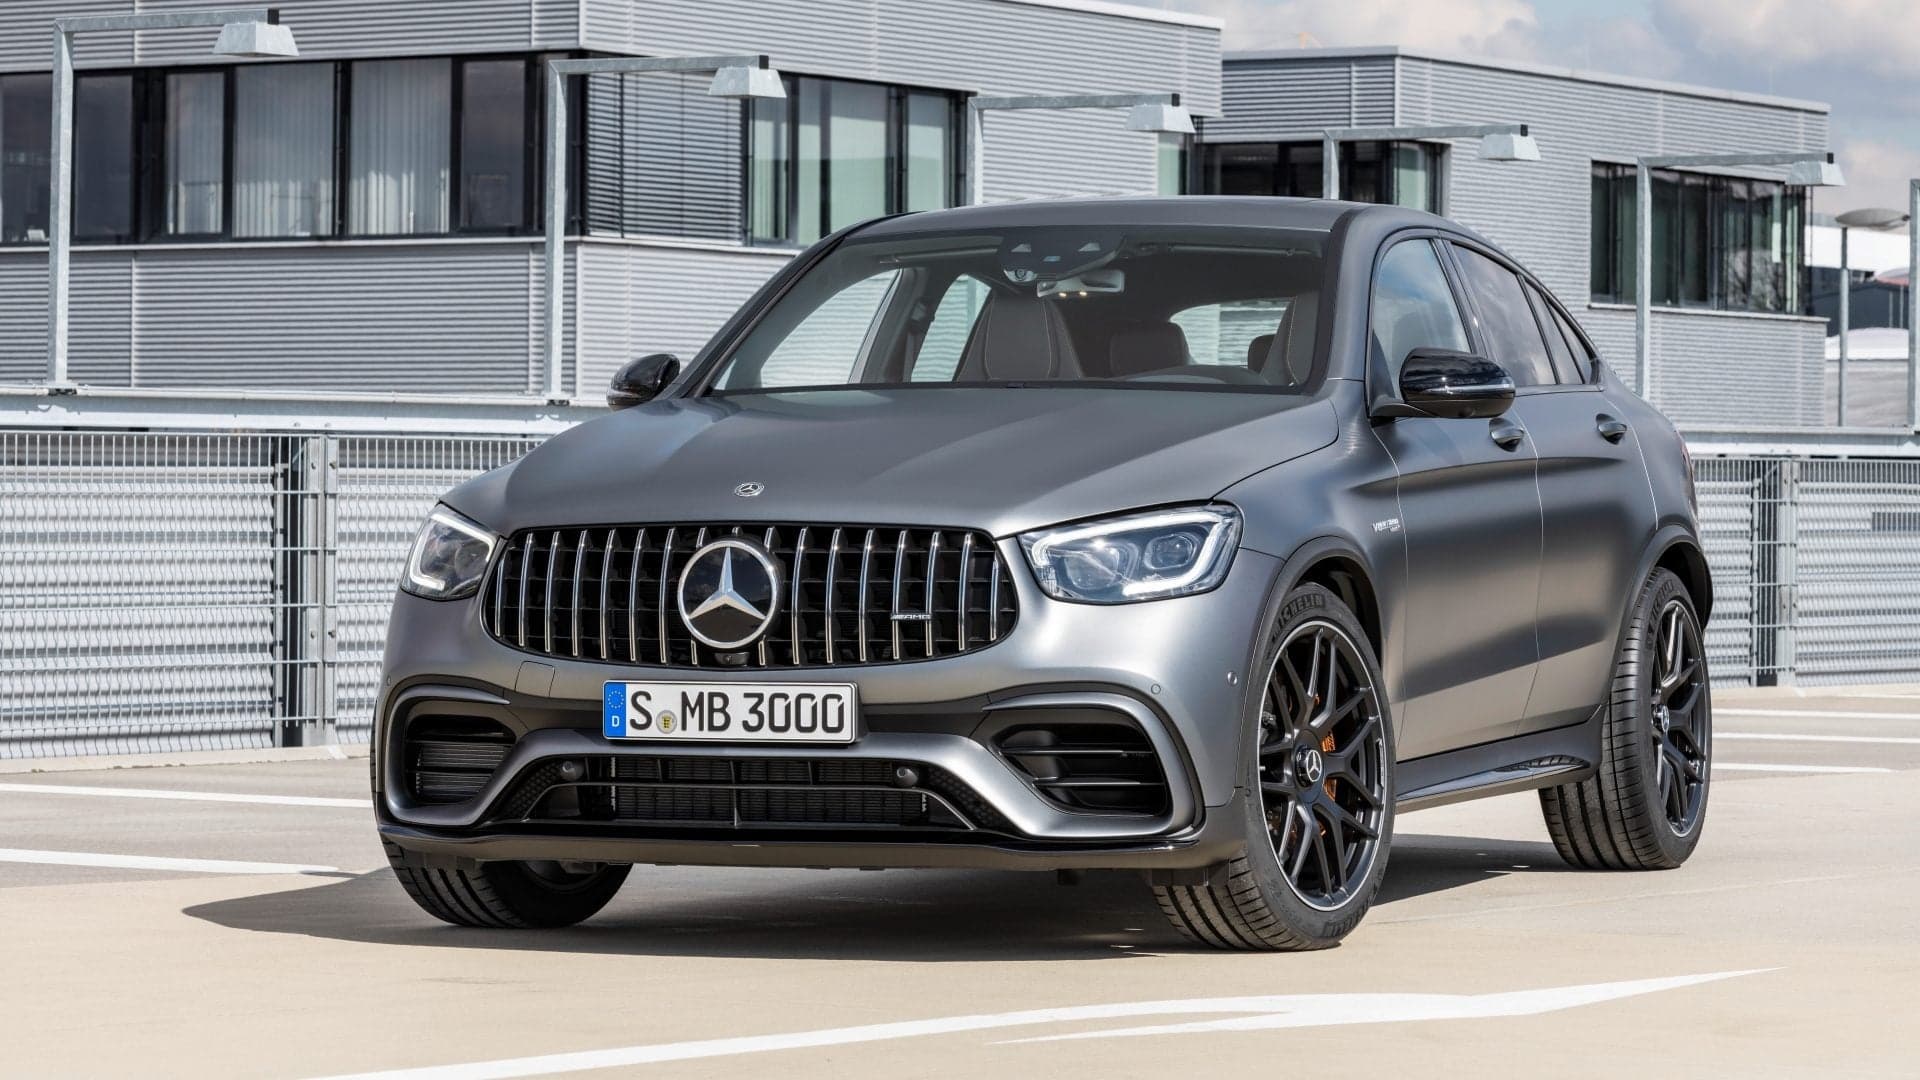 2020 Mercedes-AMG GLC 63 S: The Nurburgring King Gets MBUX and Fresh Looks